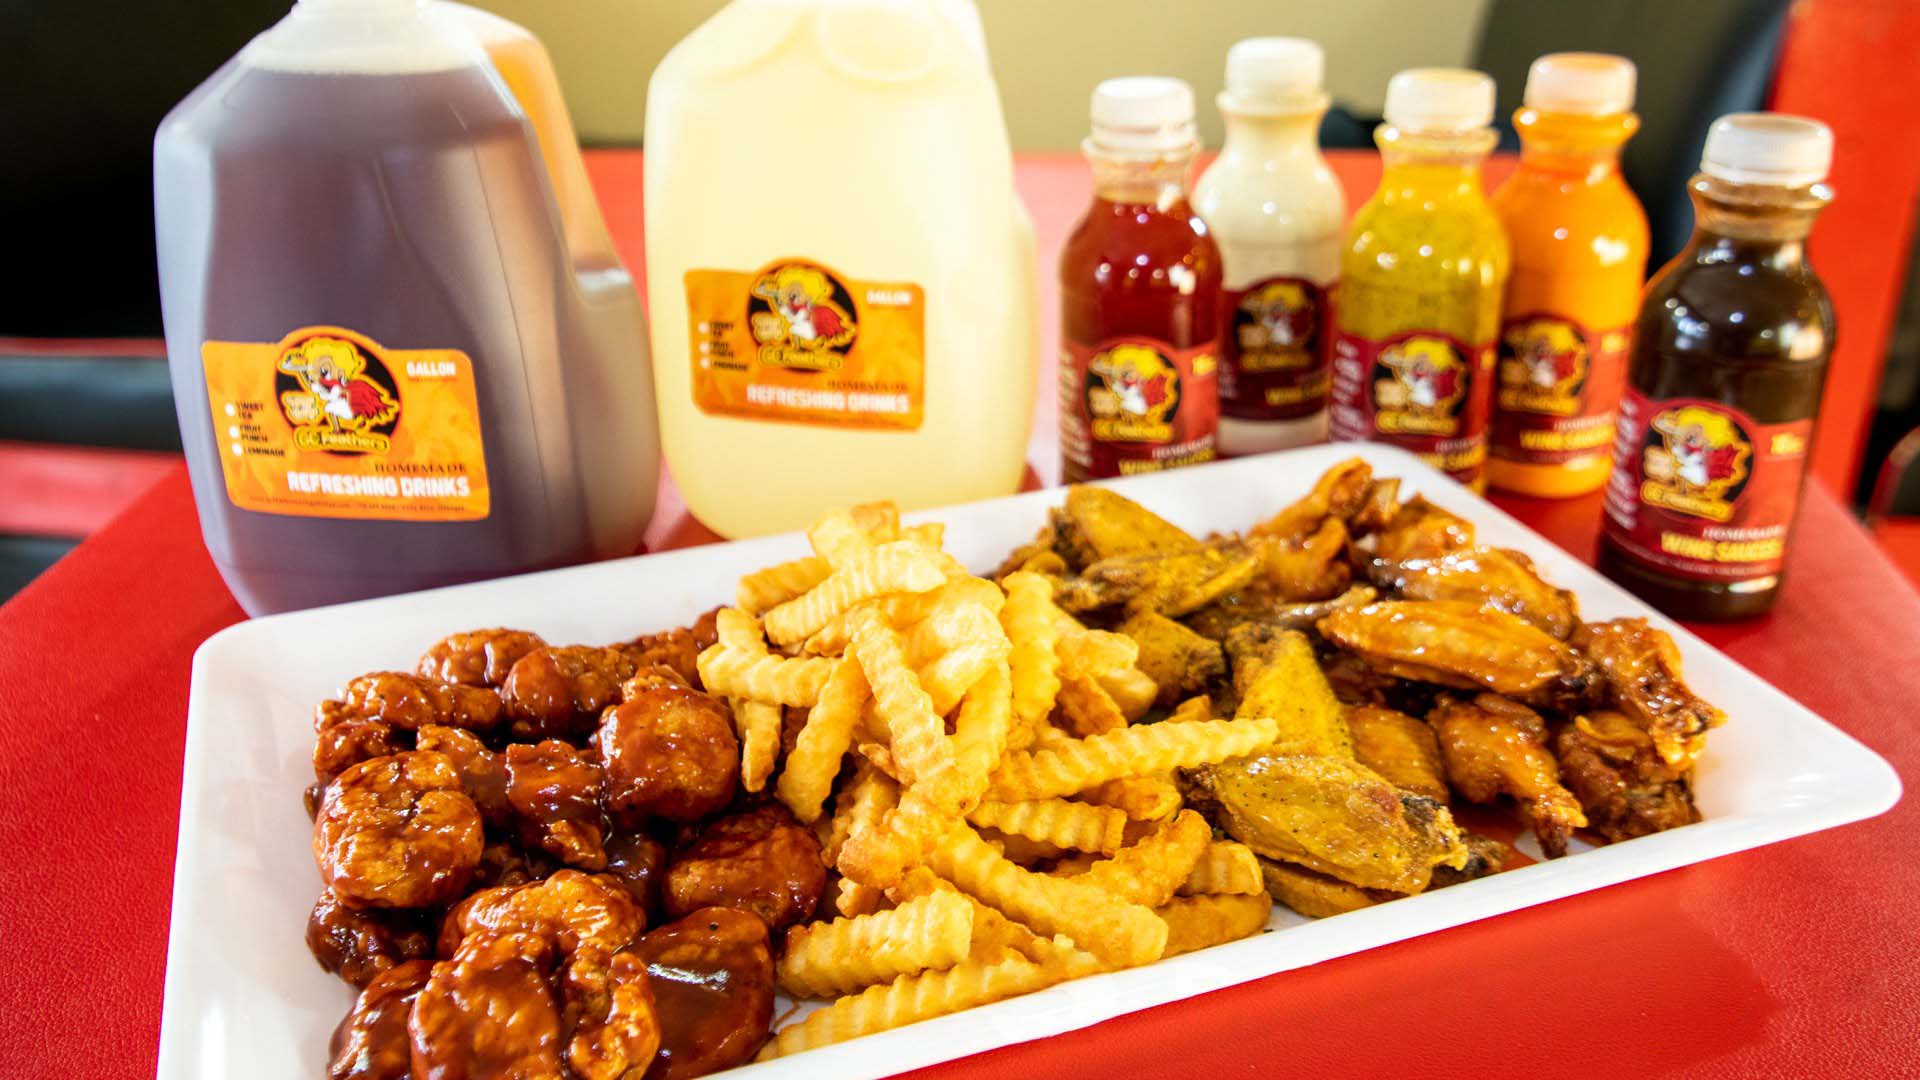 Assortment of fried chicken and waffle fries served with a selection of sauces and beverages.